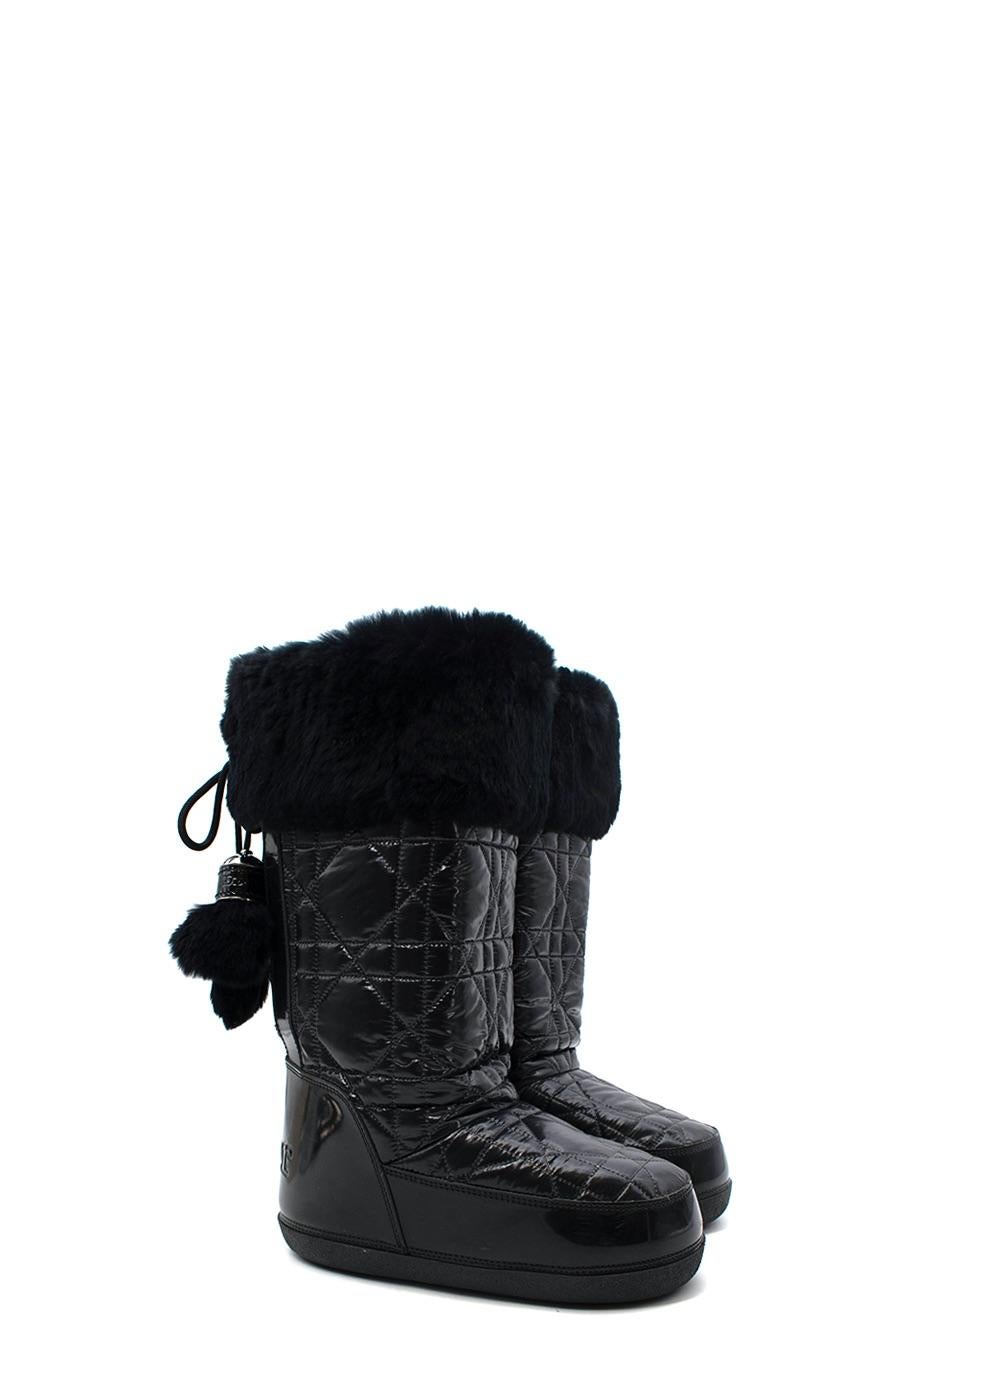 Black Cannage Nylon Fur Trimmed Snow Boots For Sale 1